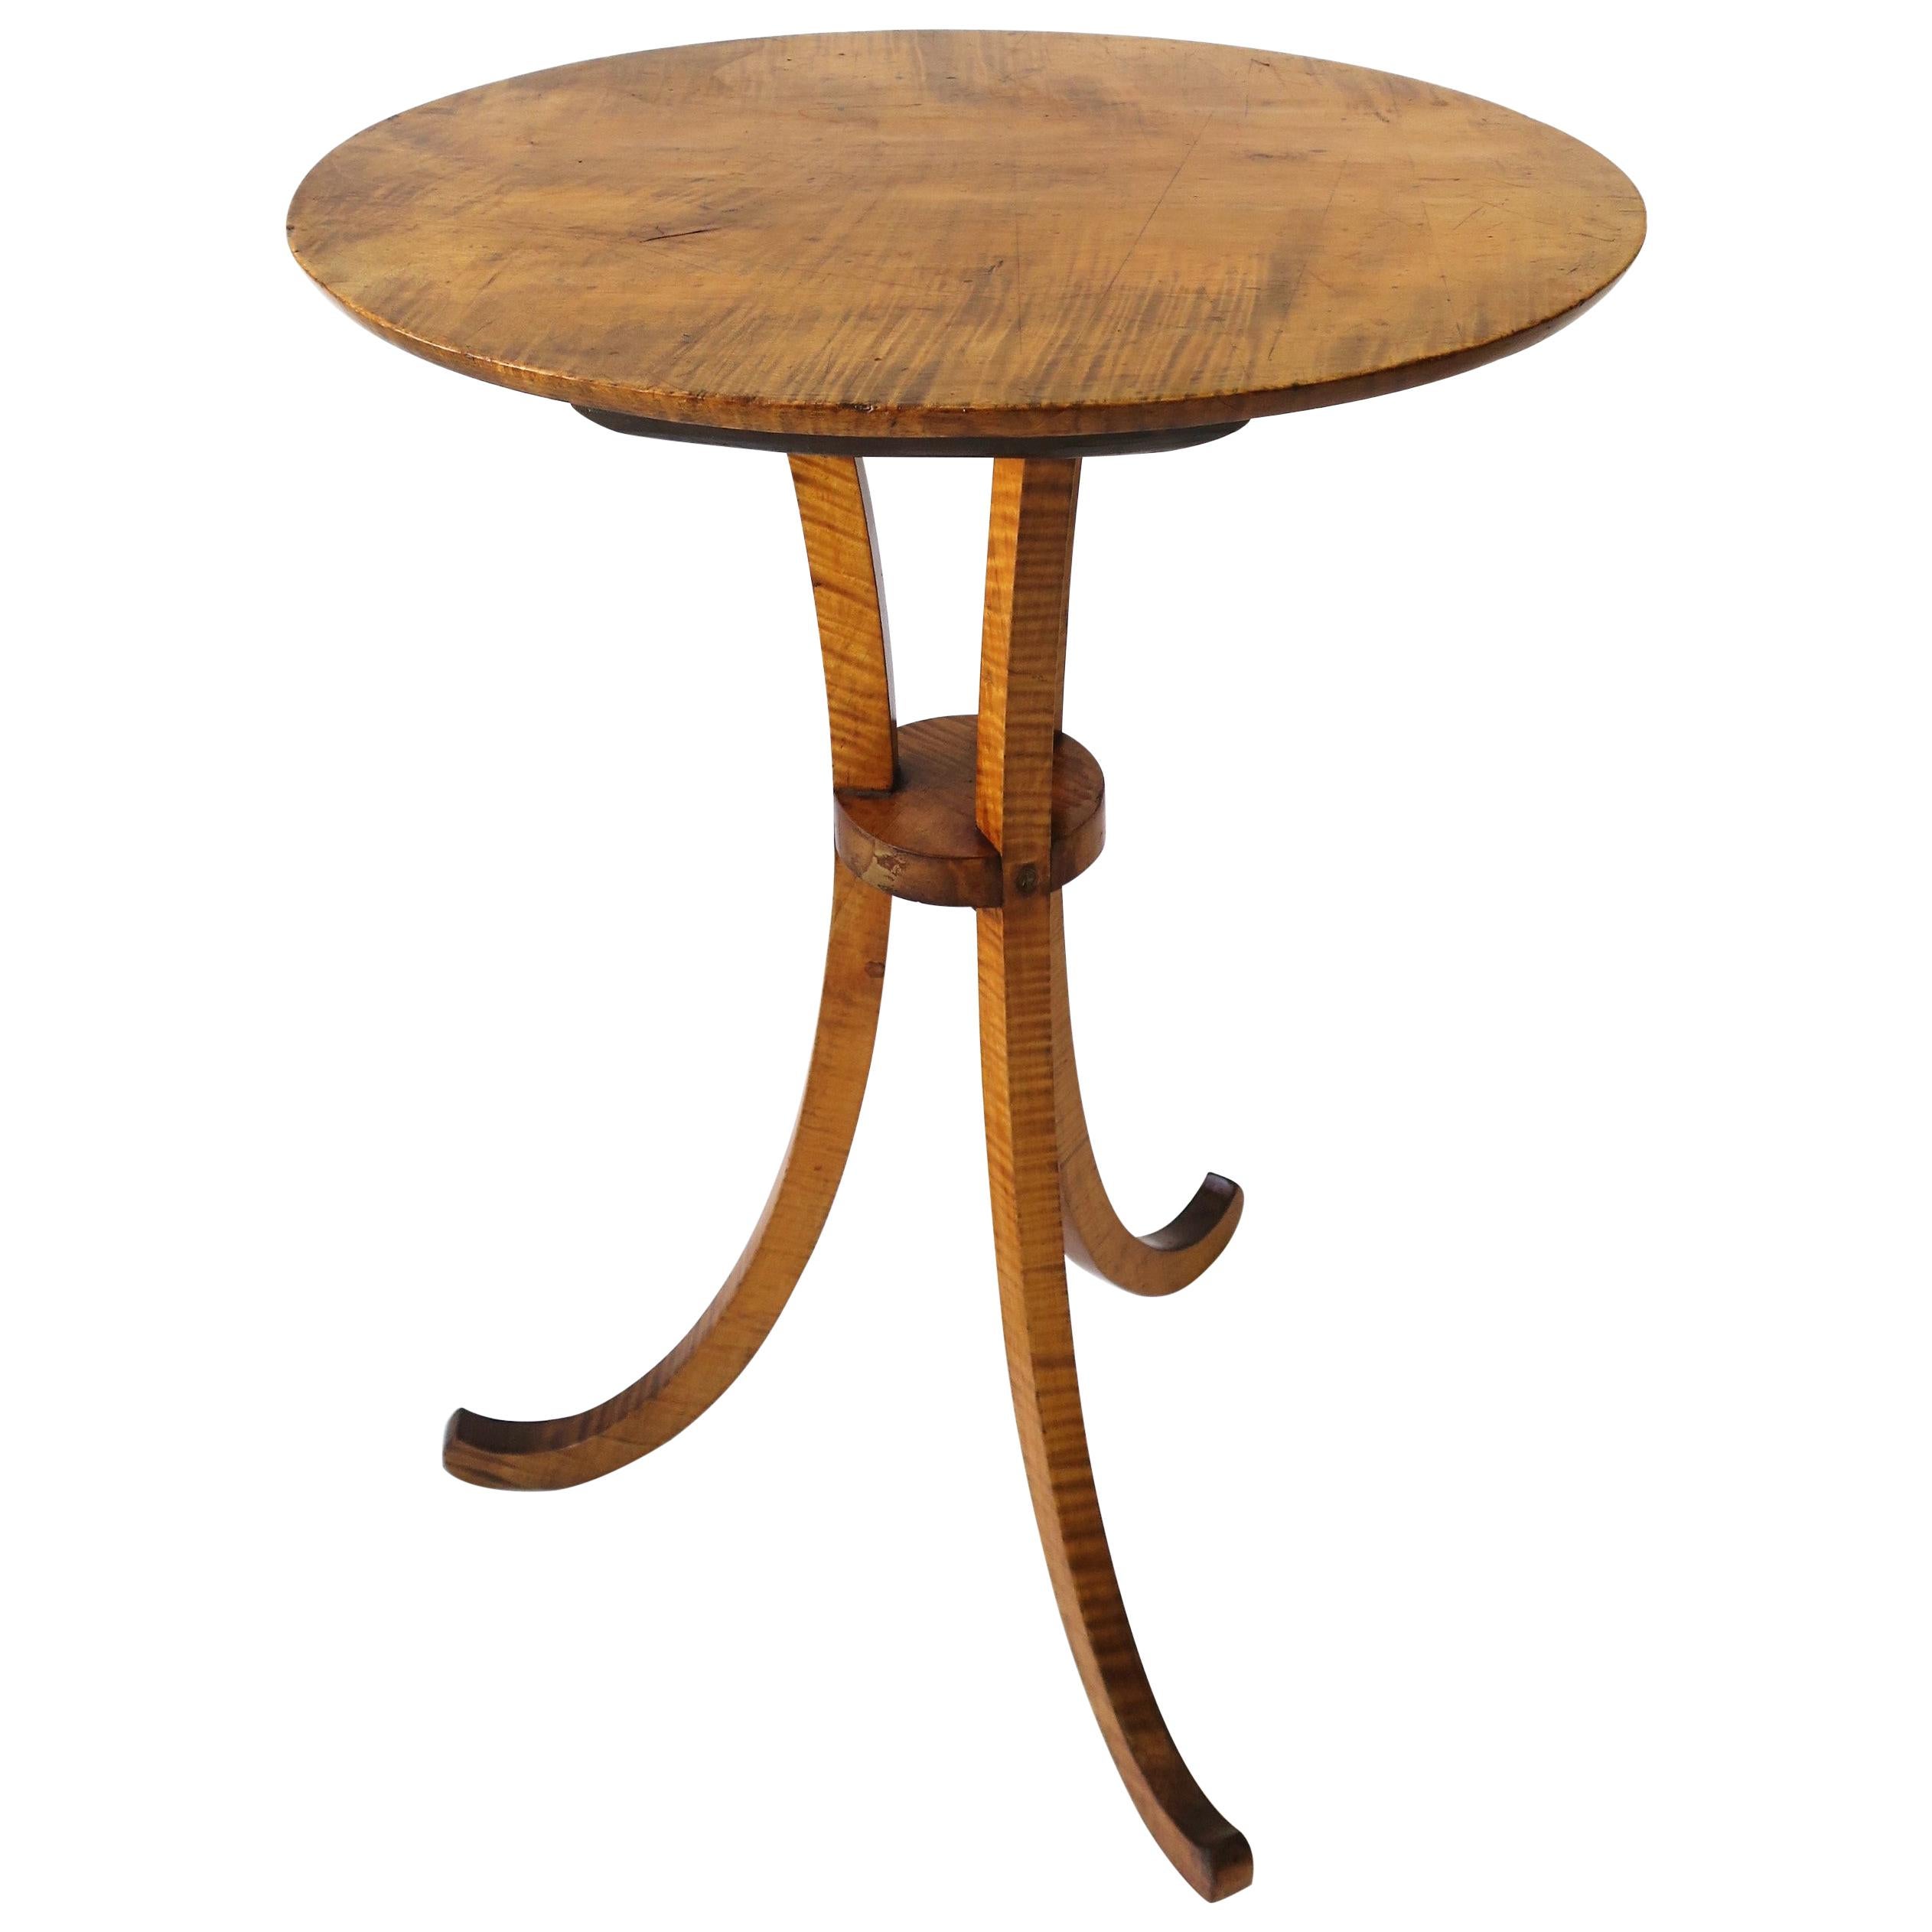 Gueridon Maple Wood End or Side Table with Flared Leg Tripod Base 